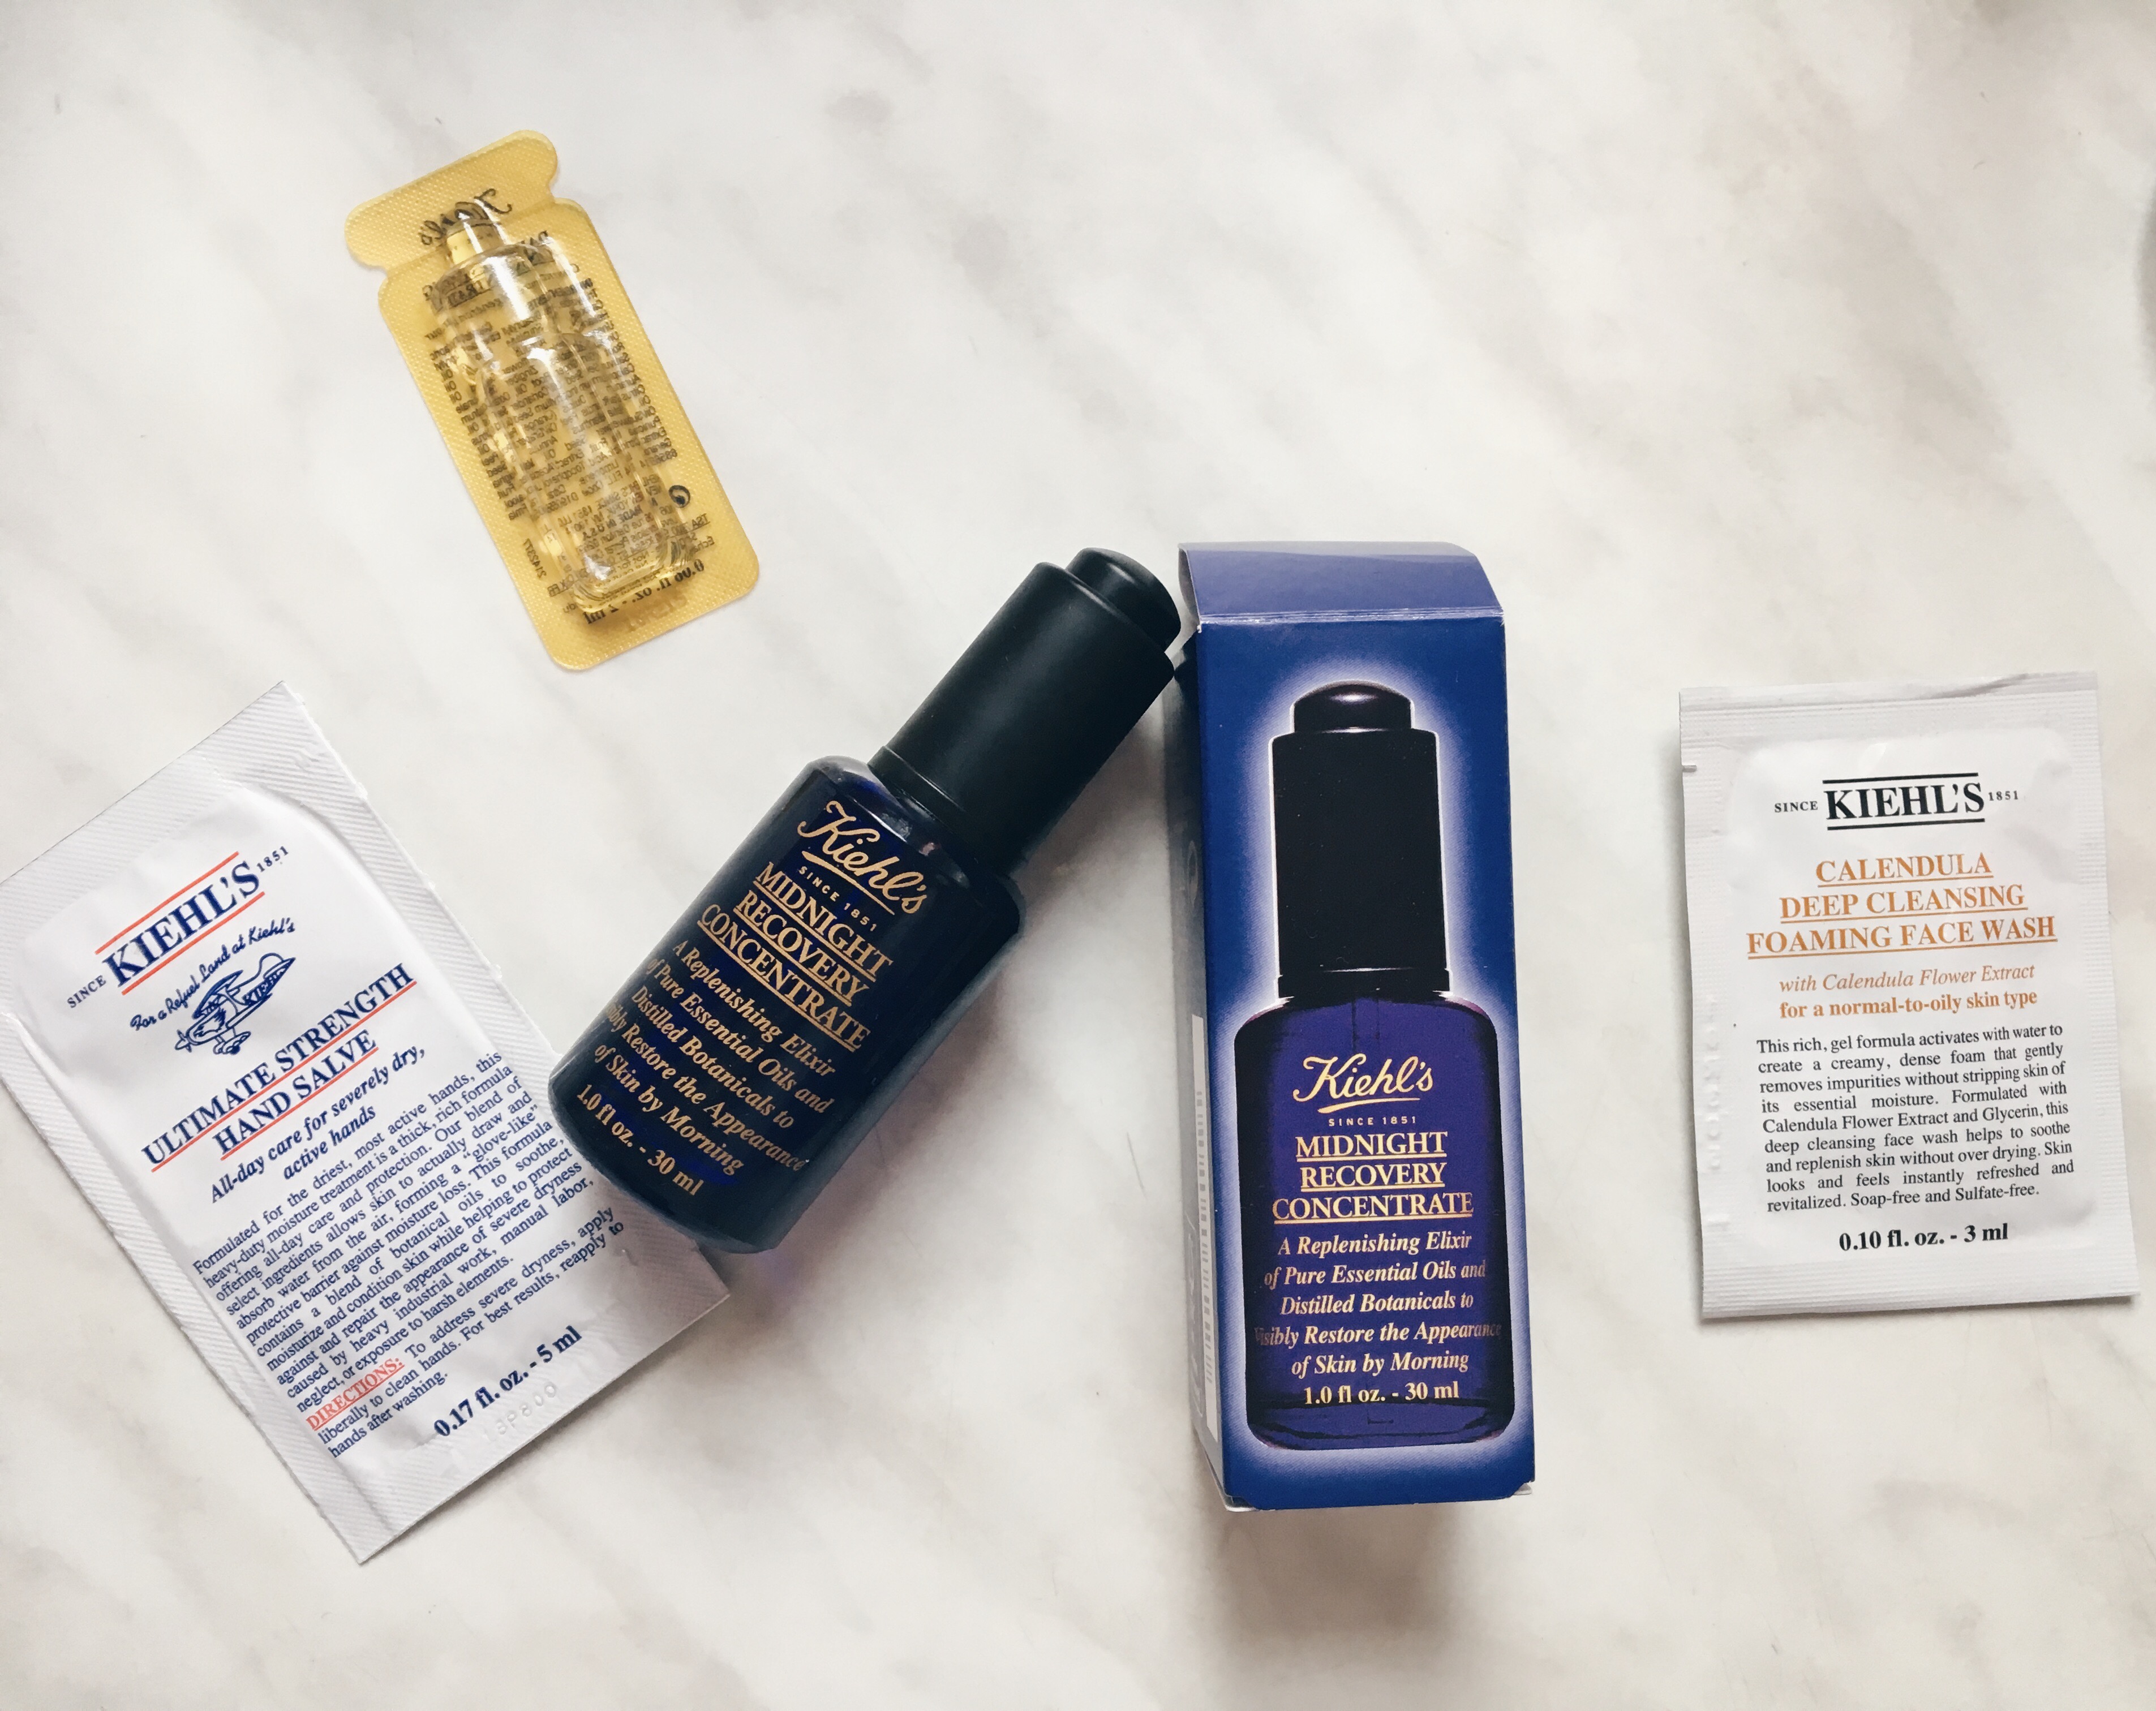 Kiehl's products review - M BLAGA